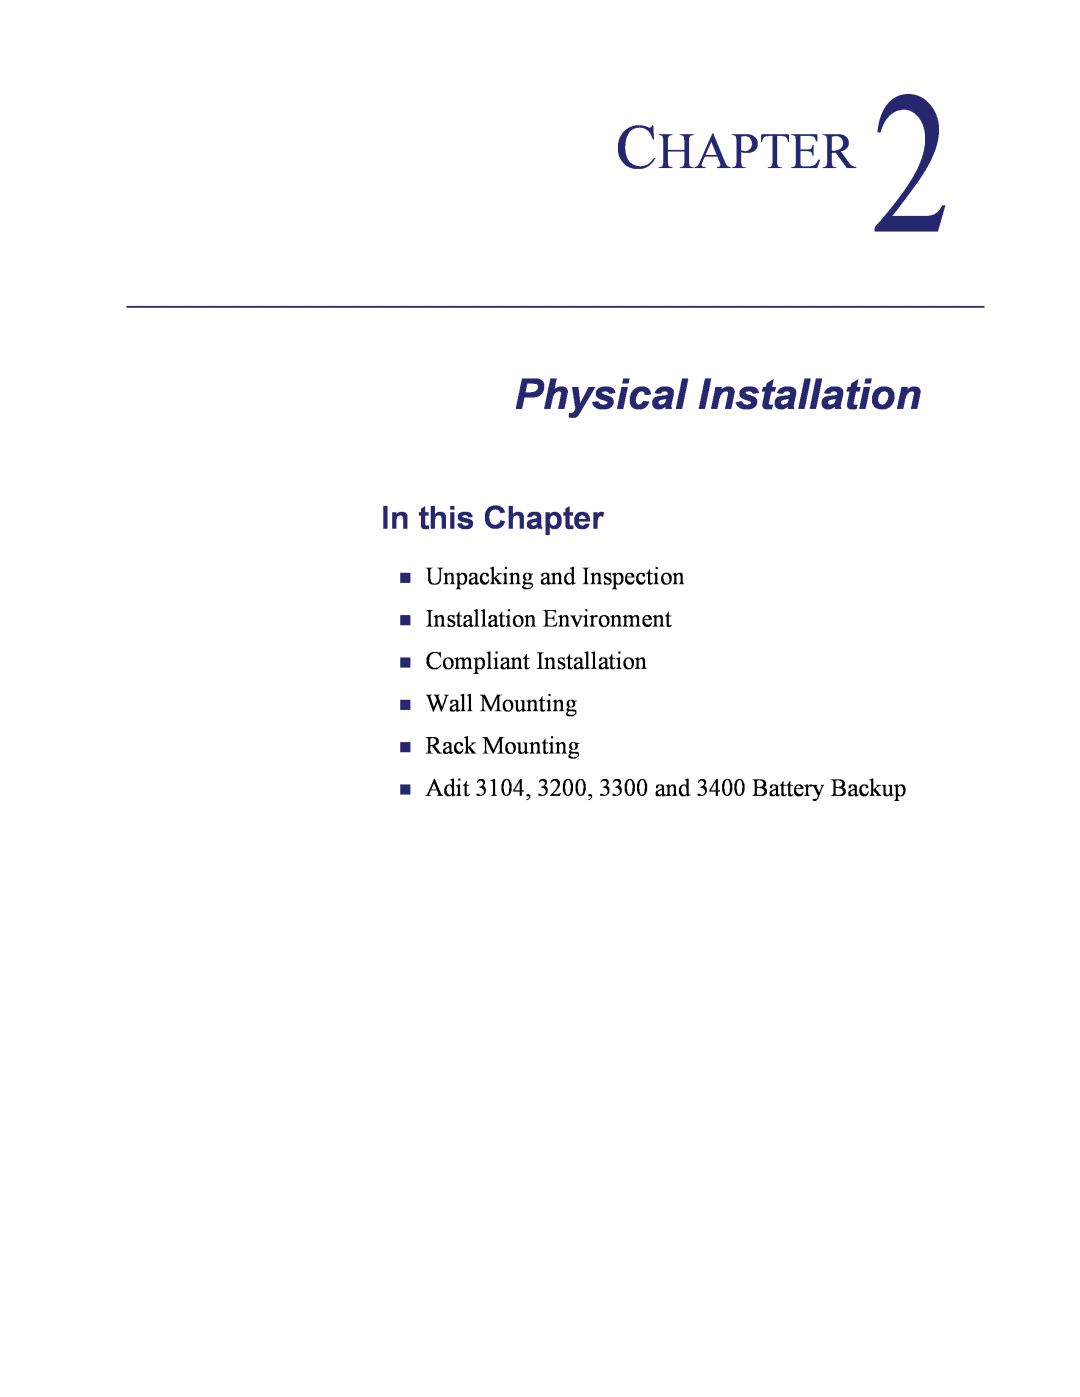 Carrier Access Adit 3104 user manual Physical Installation, Unpacking and Inspection Installation Environment, Chapter 